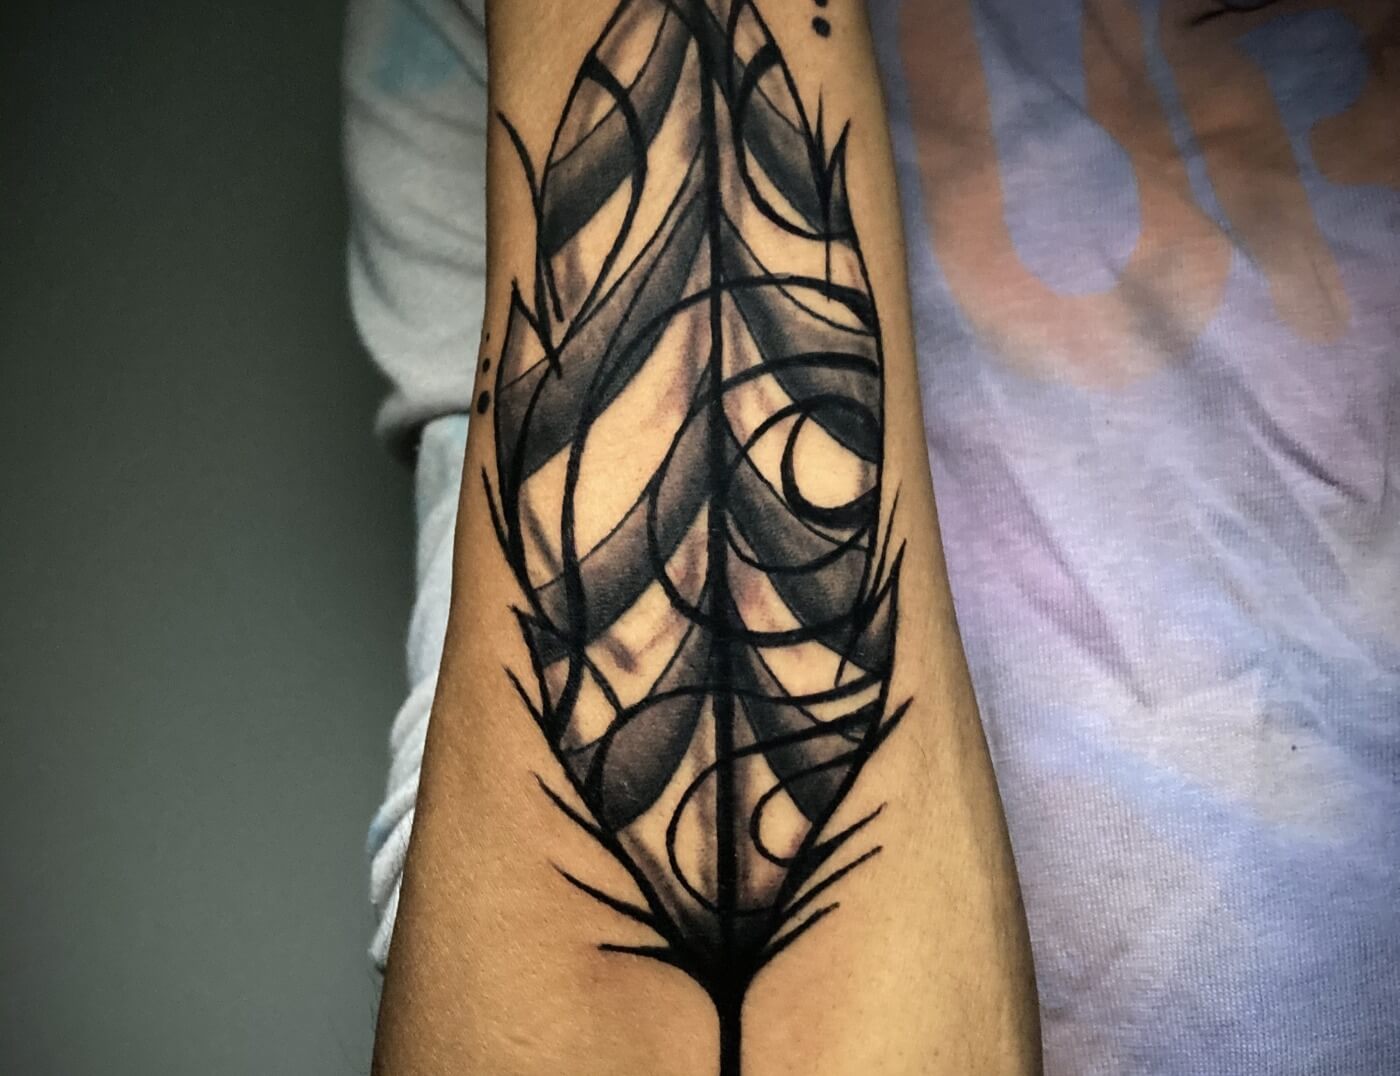 'Funky Feather' Tattoo in Black And Grey By Funk Tha World At Iron Palm Tattoos In Atlanta. Call 404-973-7828 or stop by for a free consultation with Funk. Walk Ins are welcome.